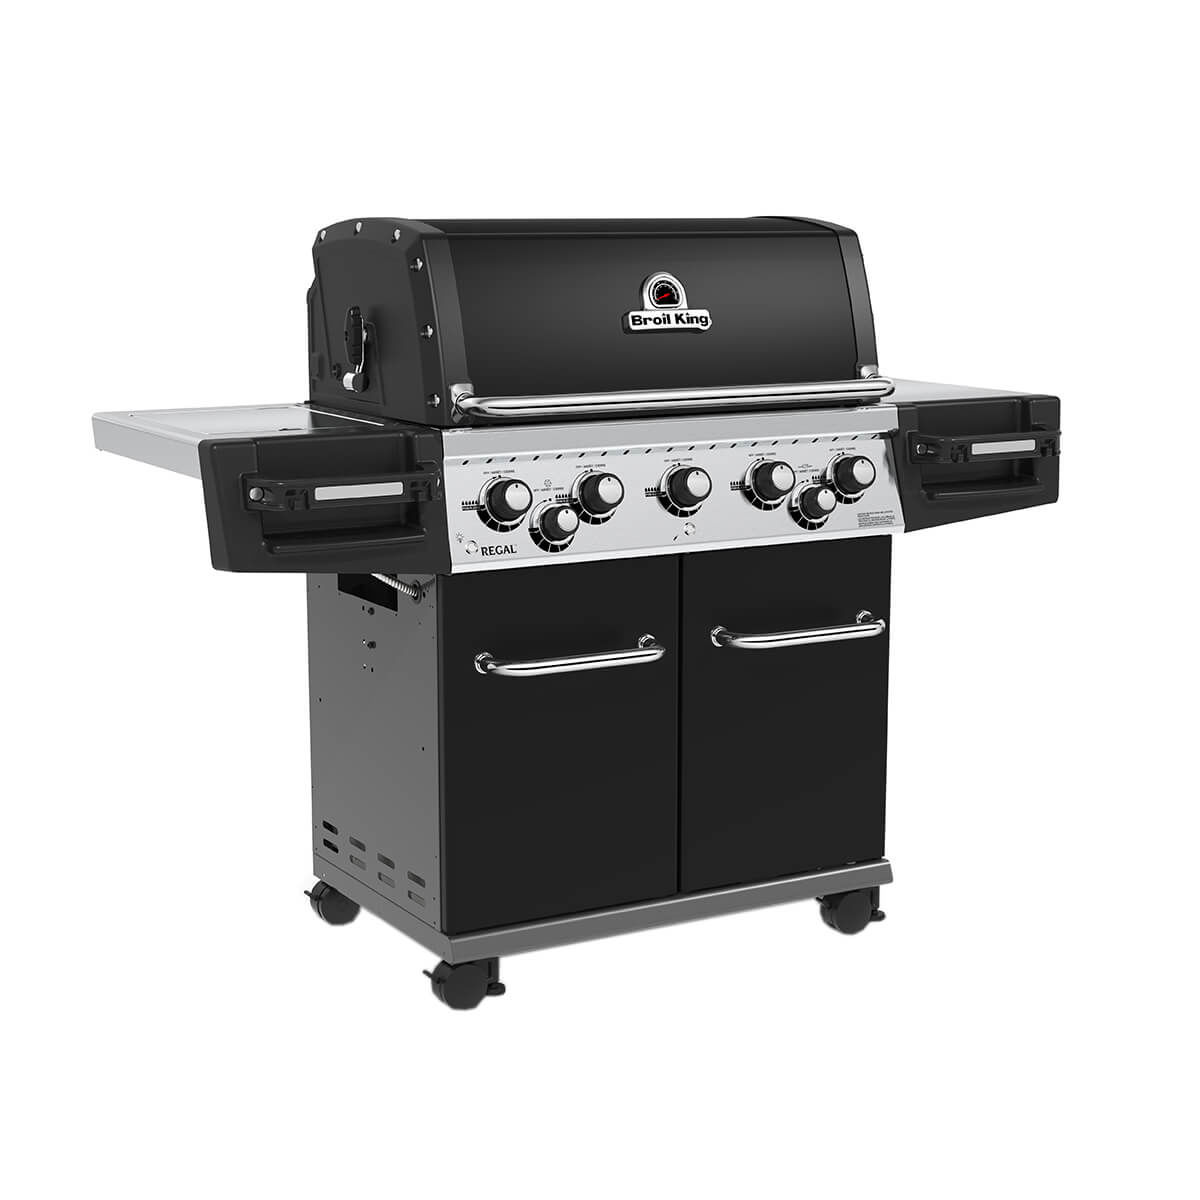 Image of Broil King Regal 590 Black Grill bei nettoshop.ch